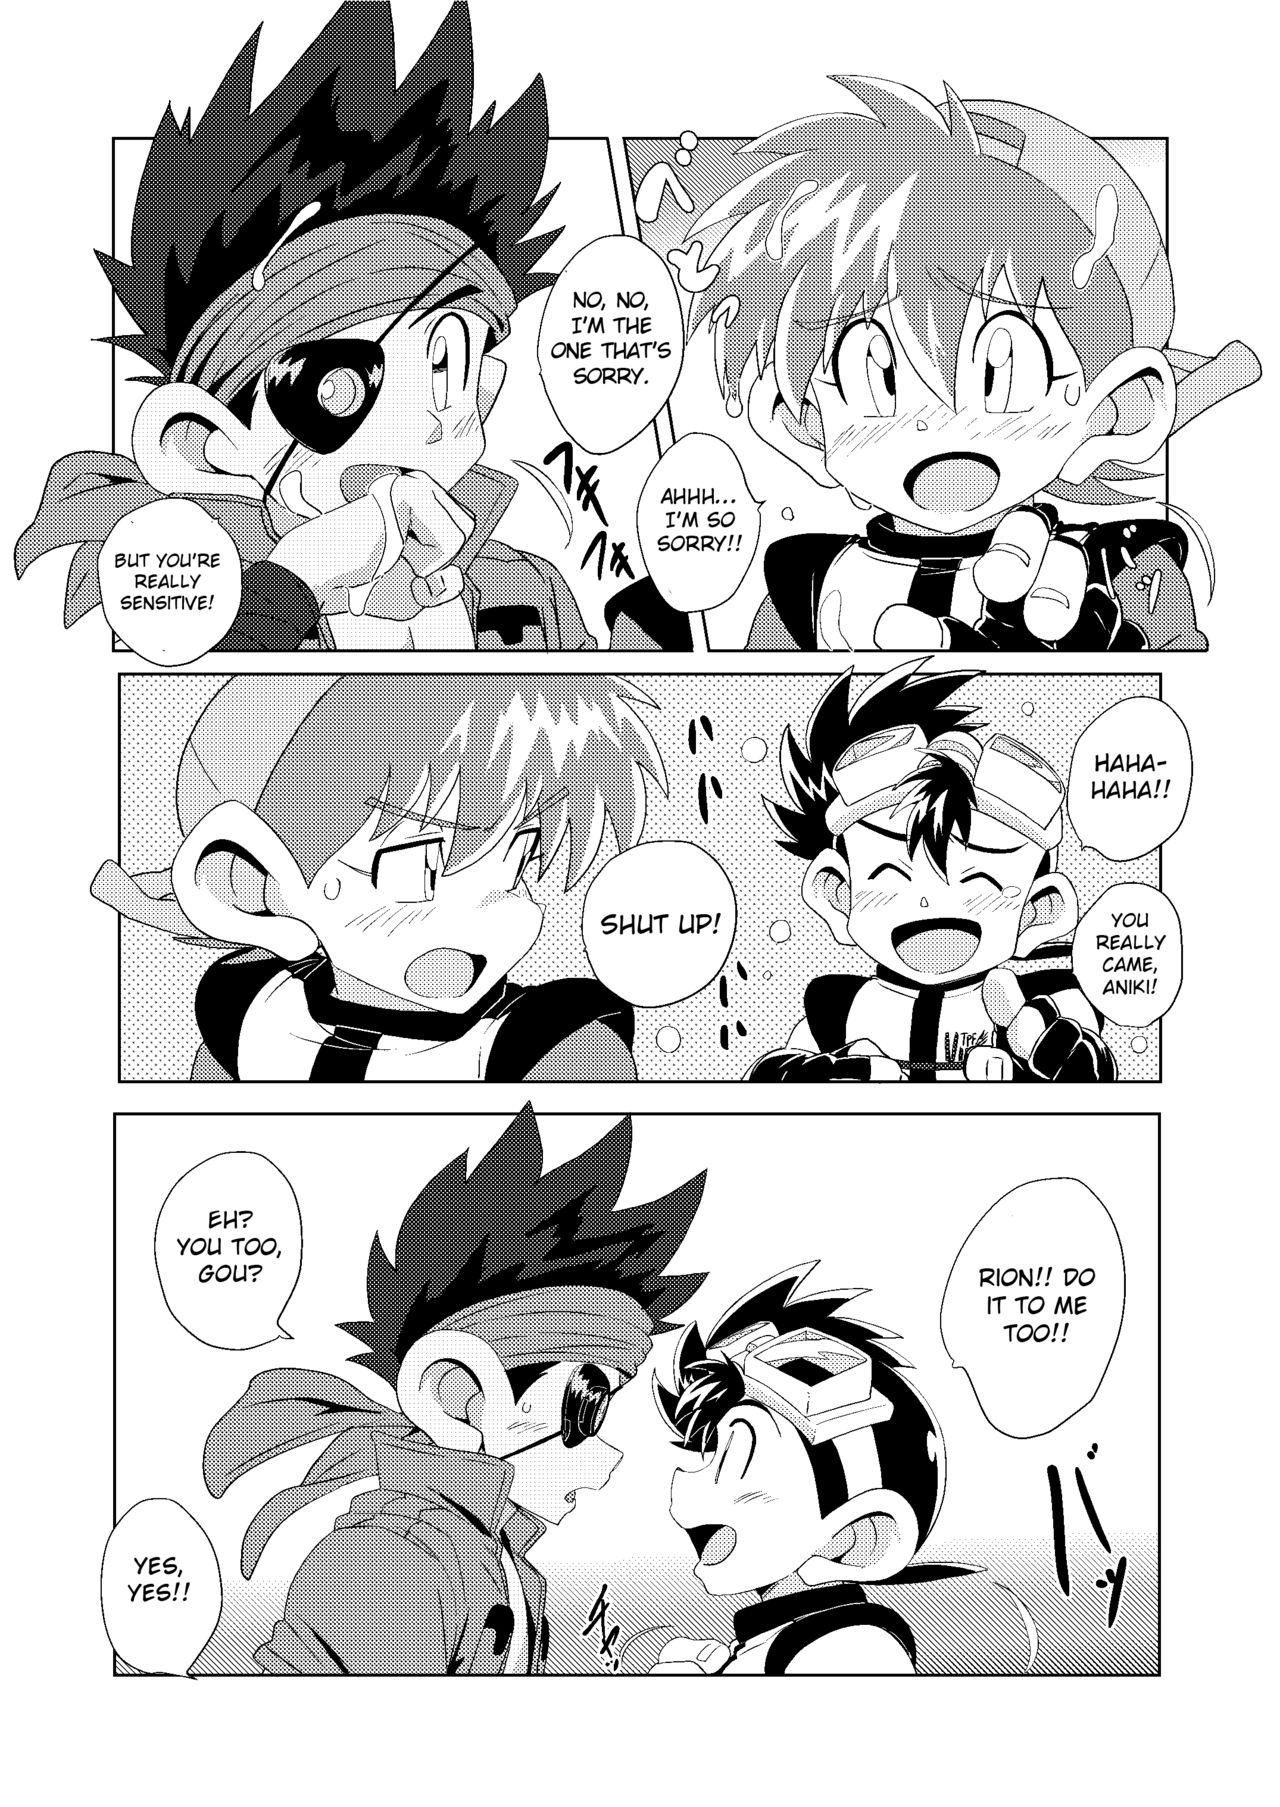 Roludo Chase the Wind - Bakusou kyoudai lets and go Vintage - Page 6